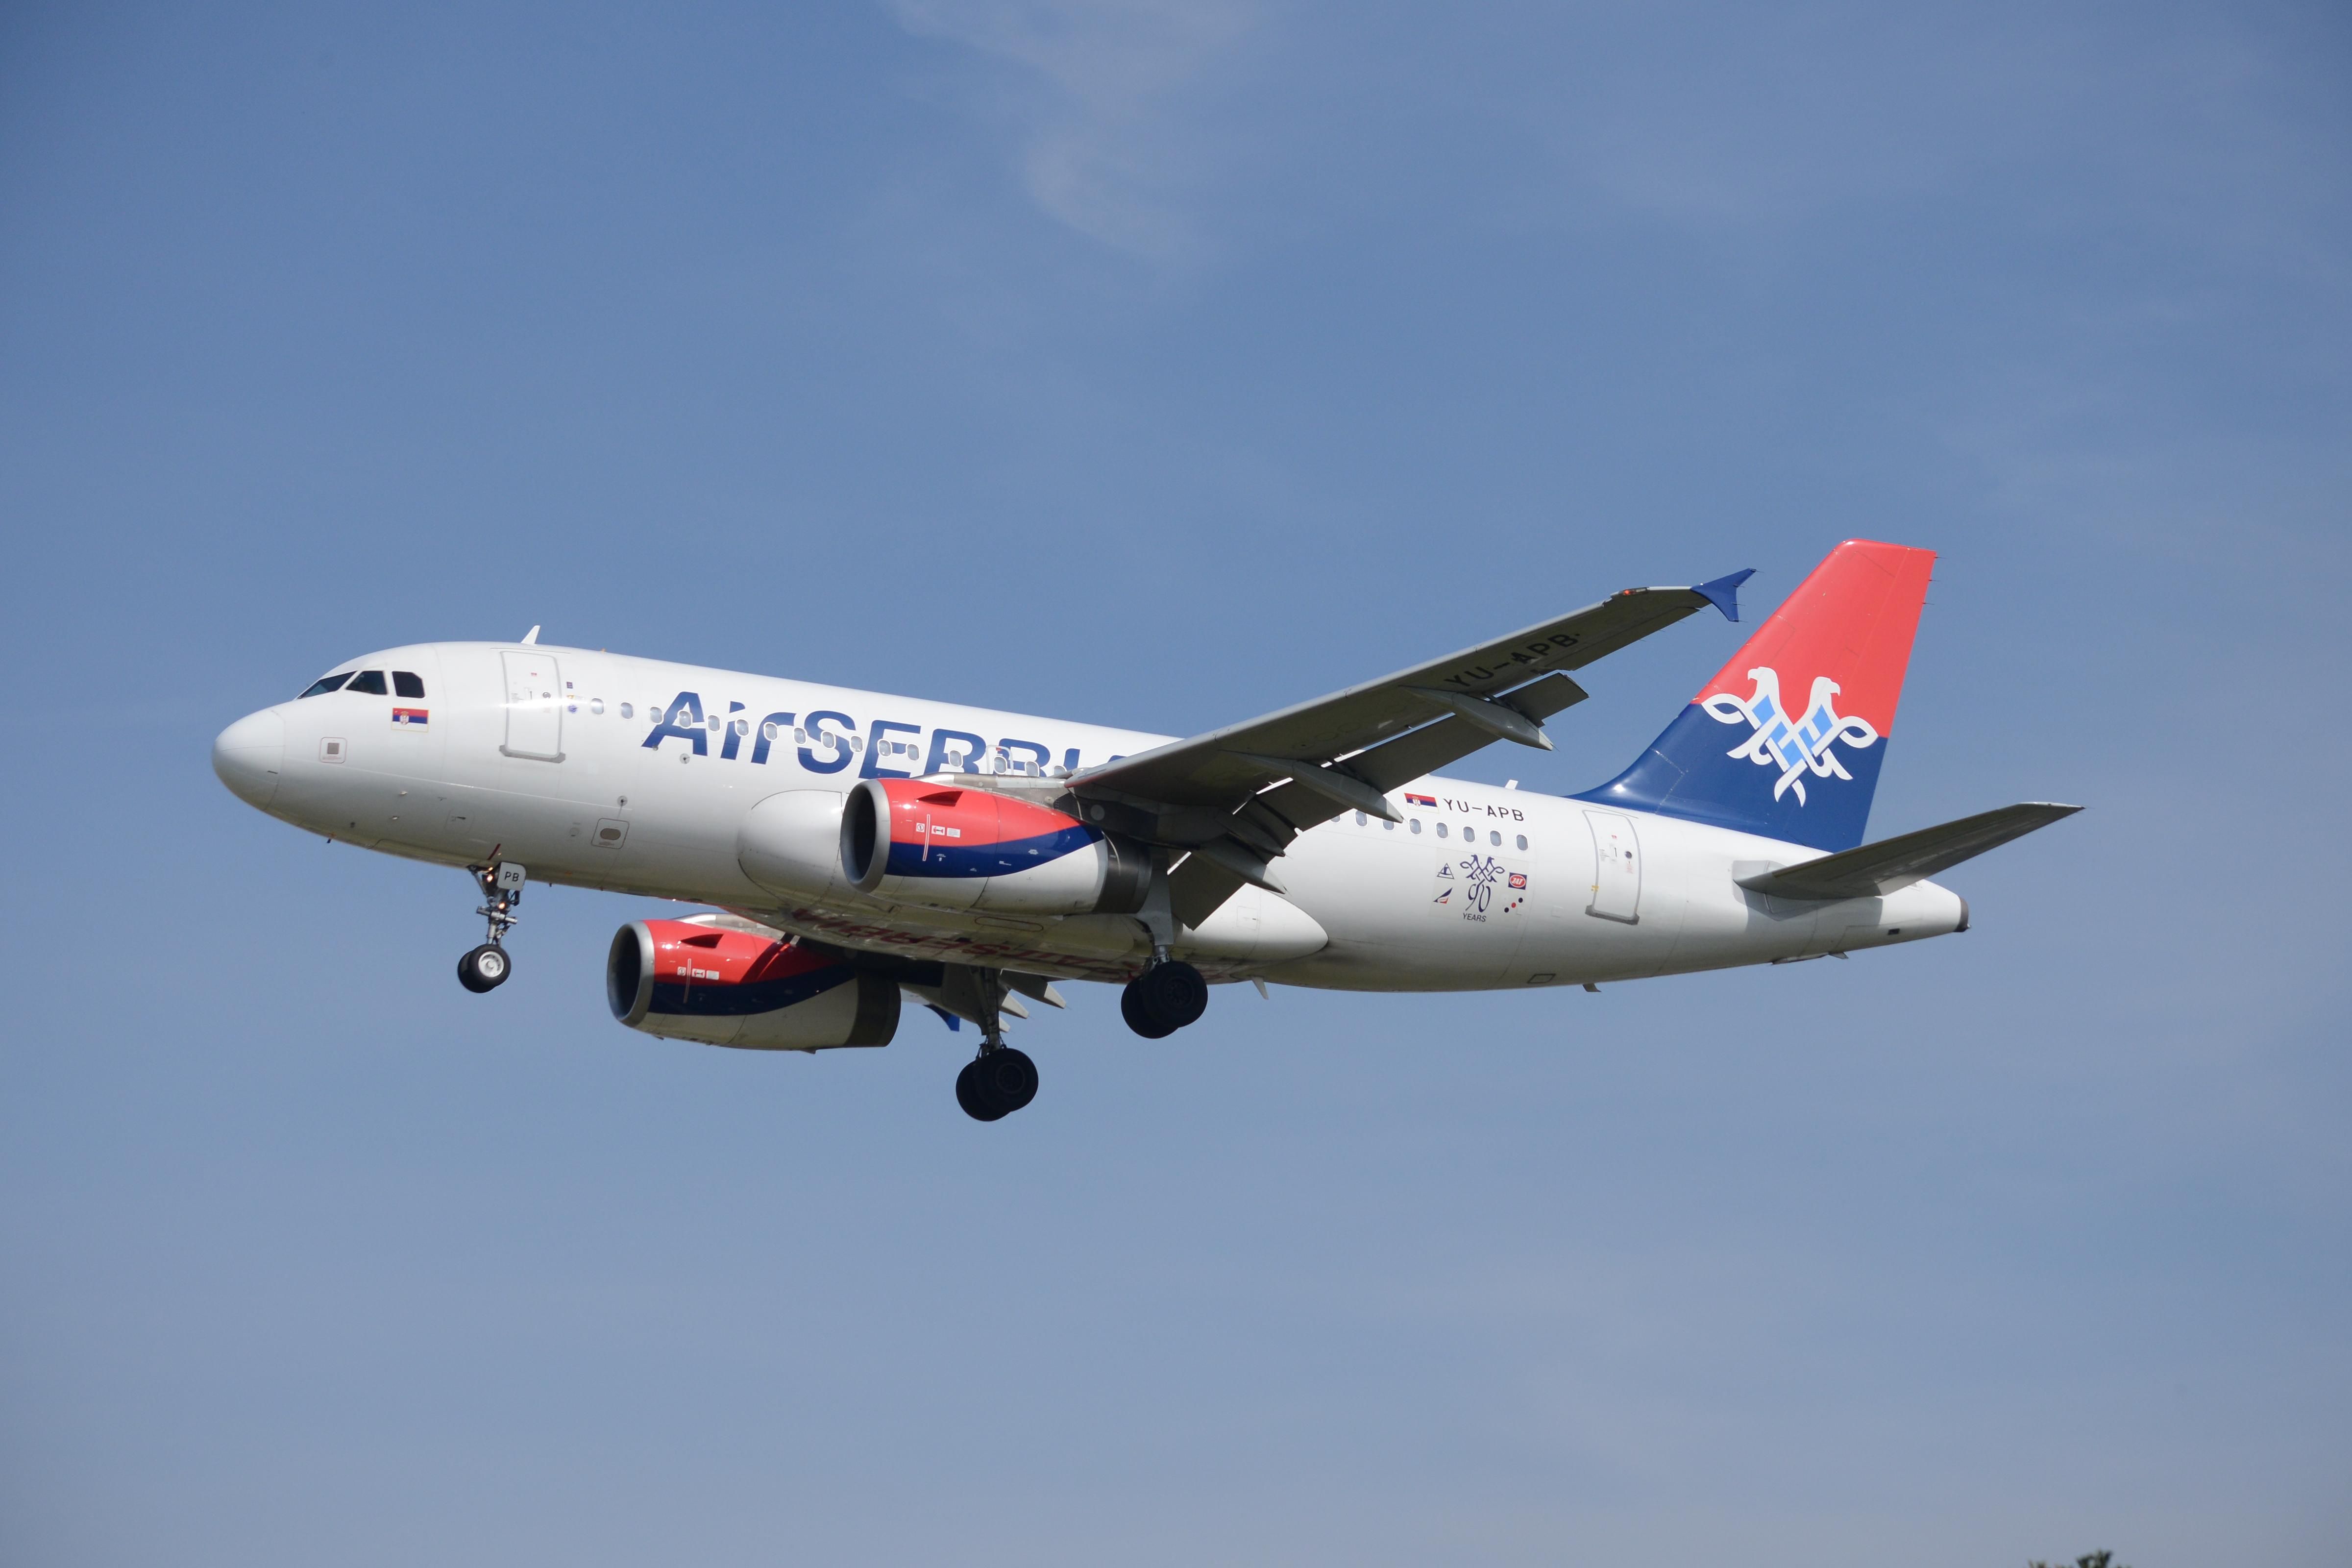 An Air Serbia Airbus A319-100 flying in the sky.